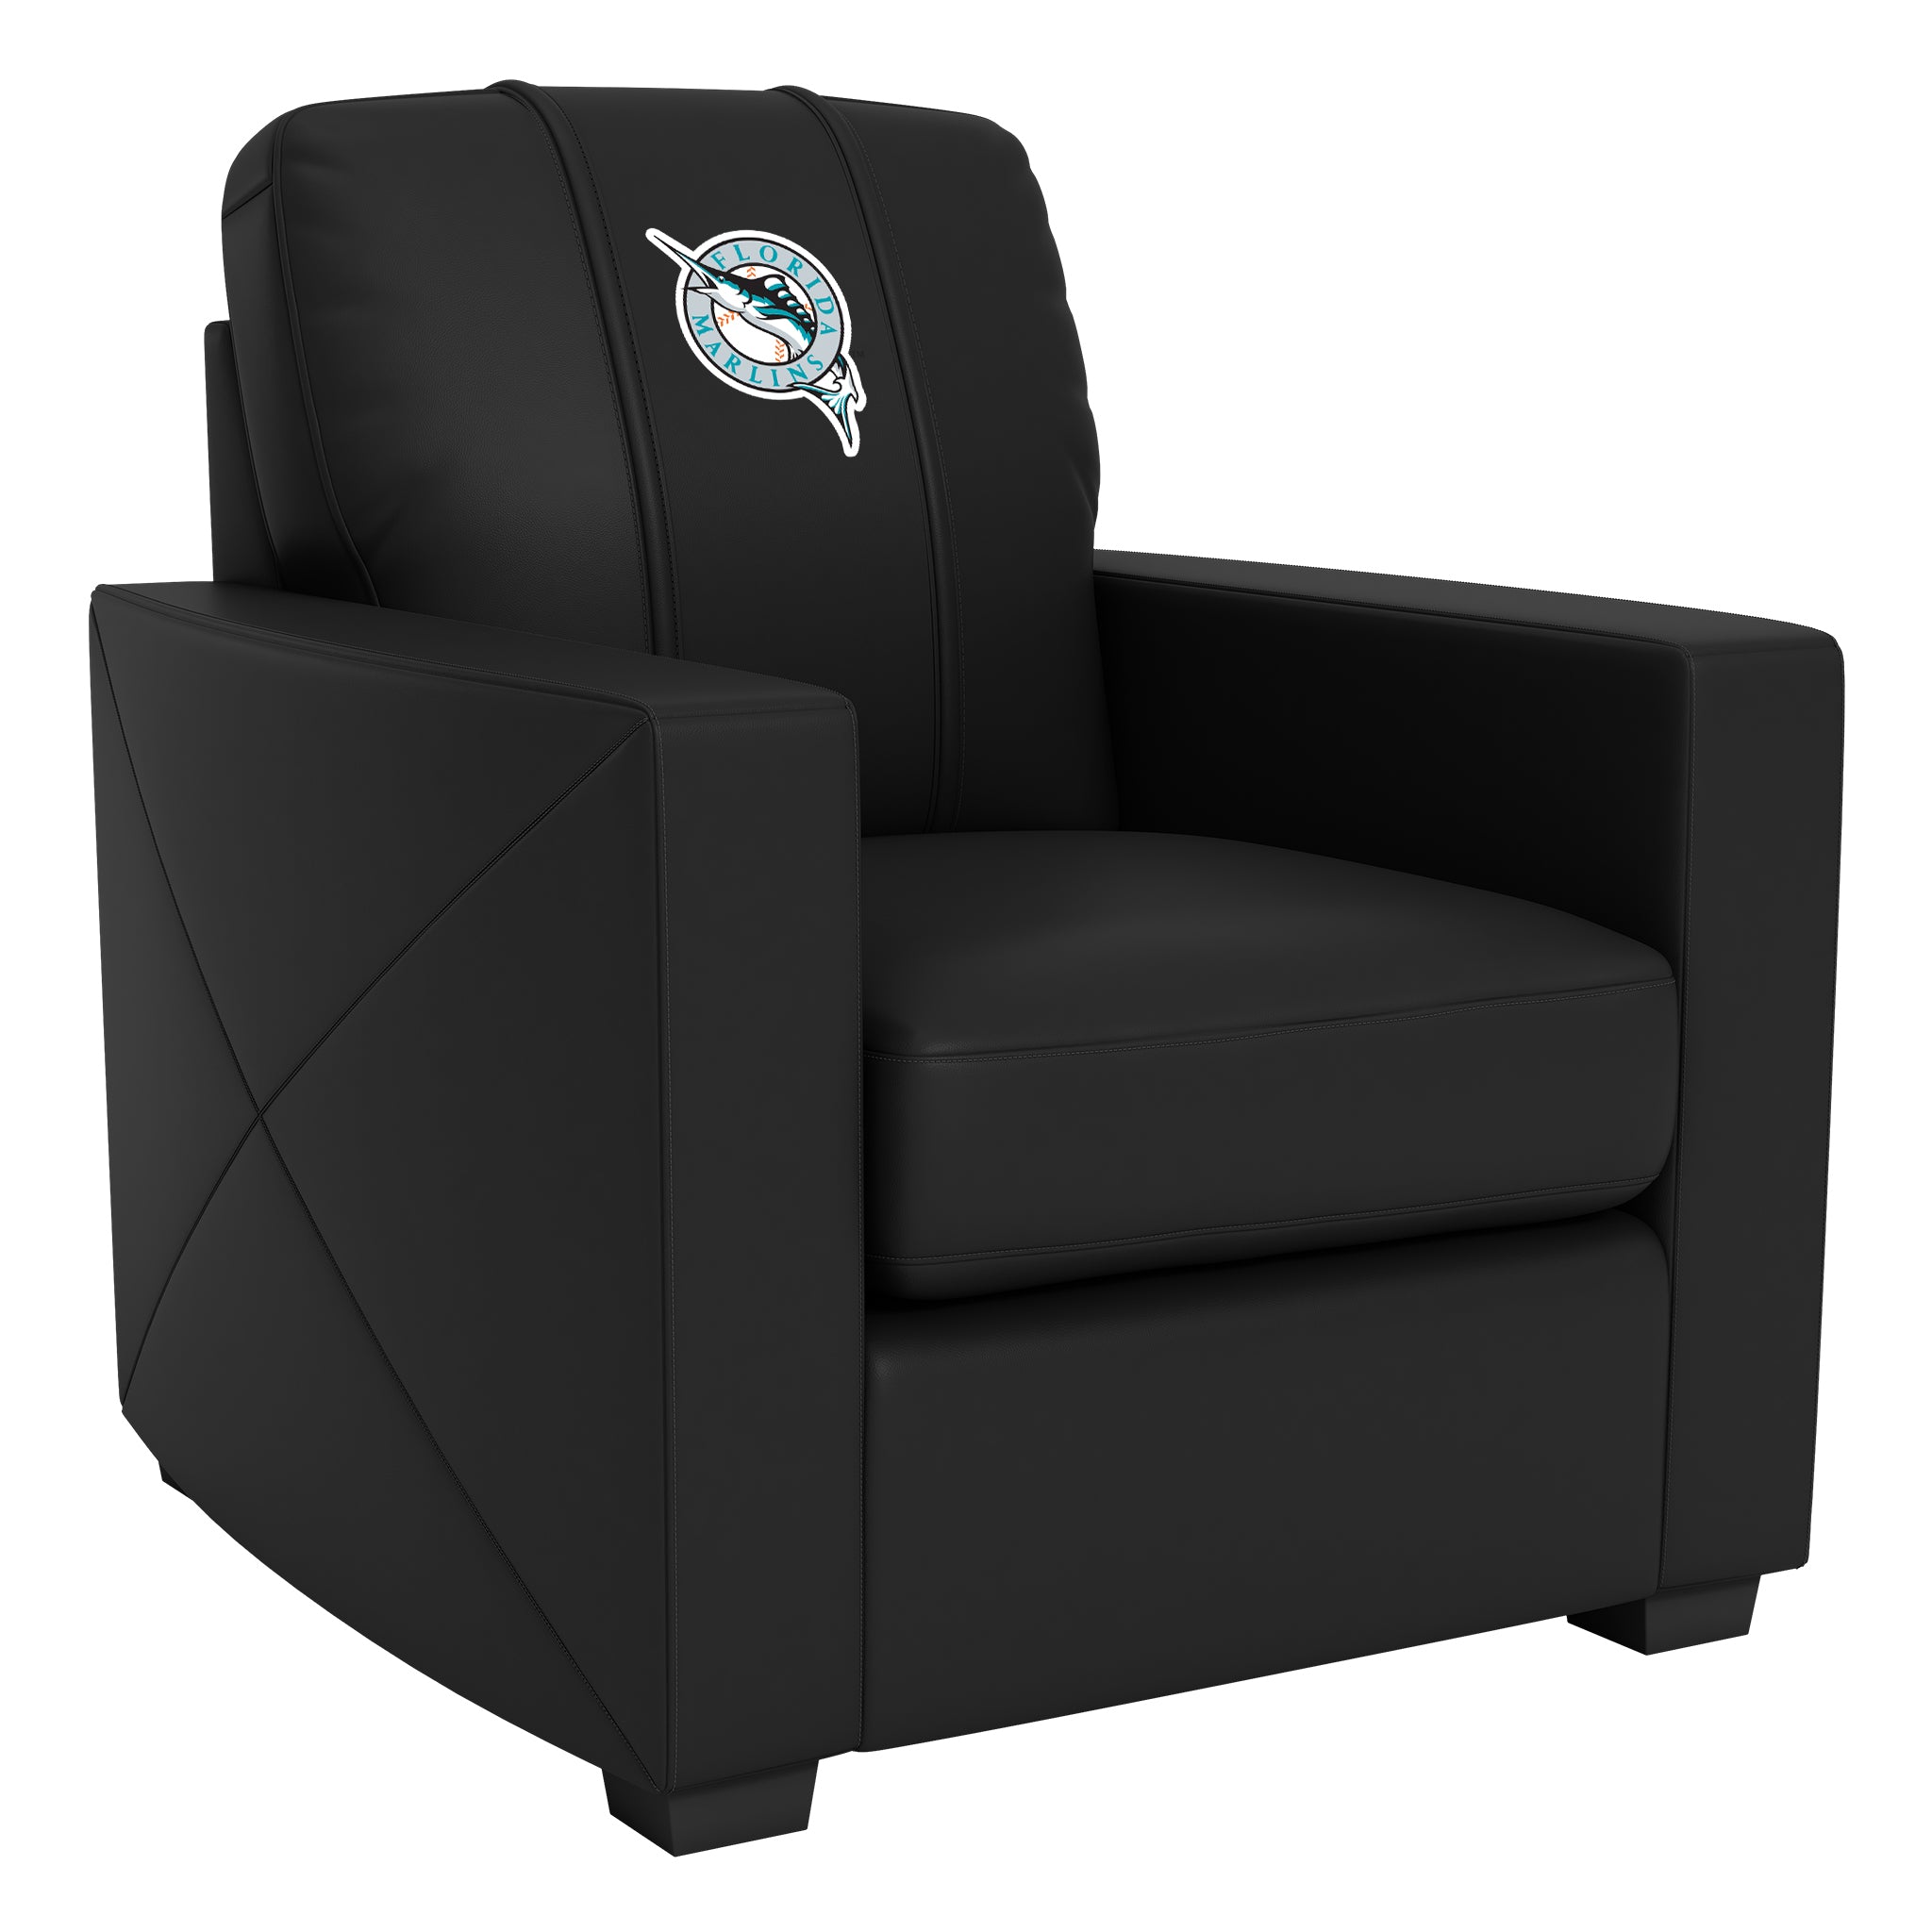 Silver Club Chair with Florida Marlins Cooperstown Primary